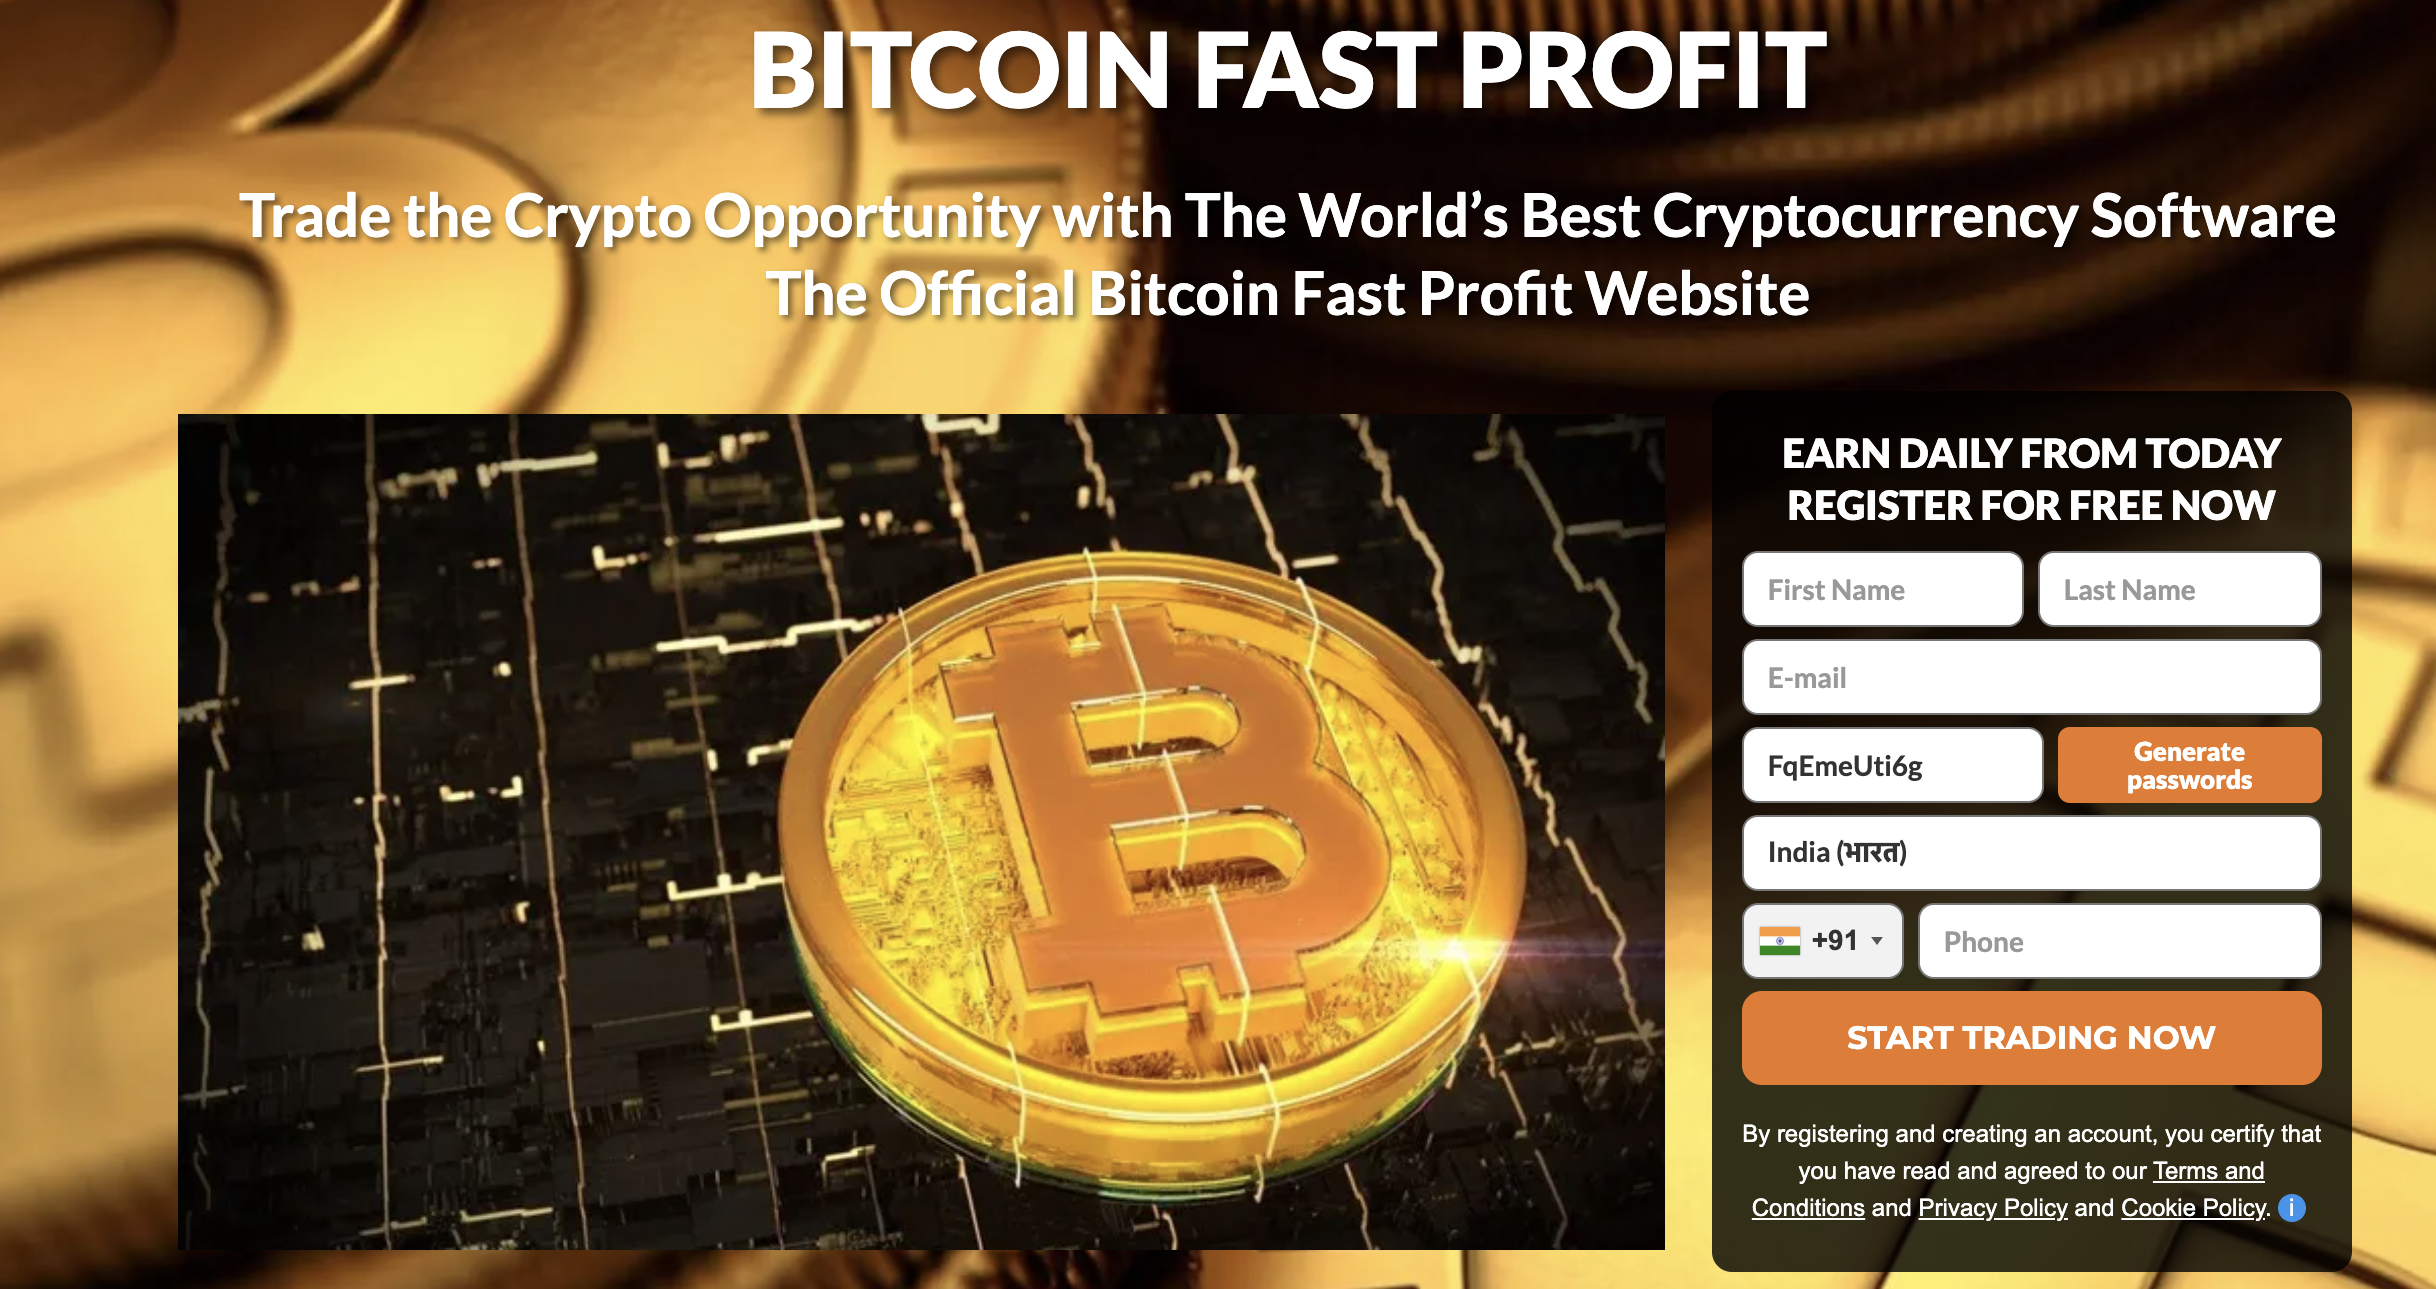 Bitcoin Fast Profit Review